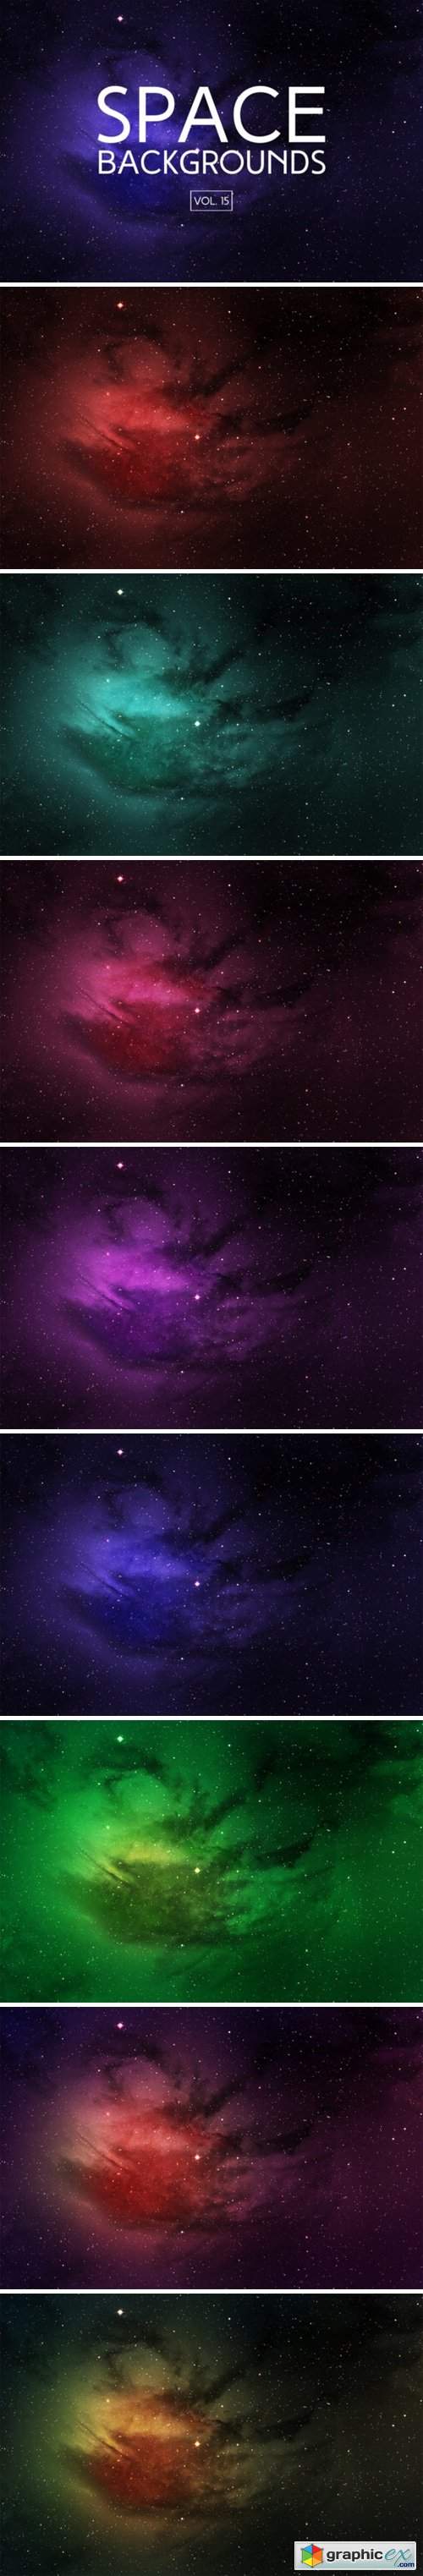 Space Backgrounds Vol.15